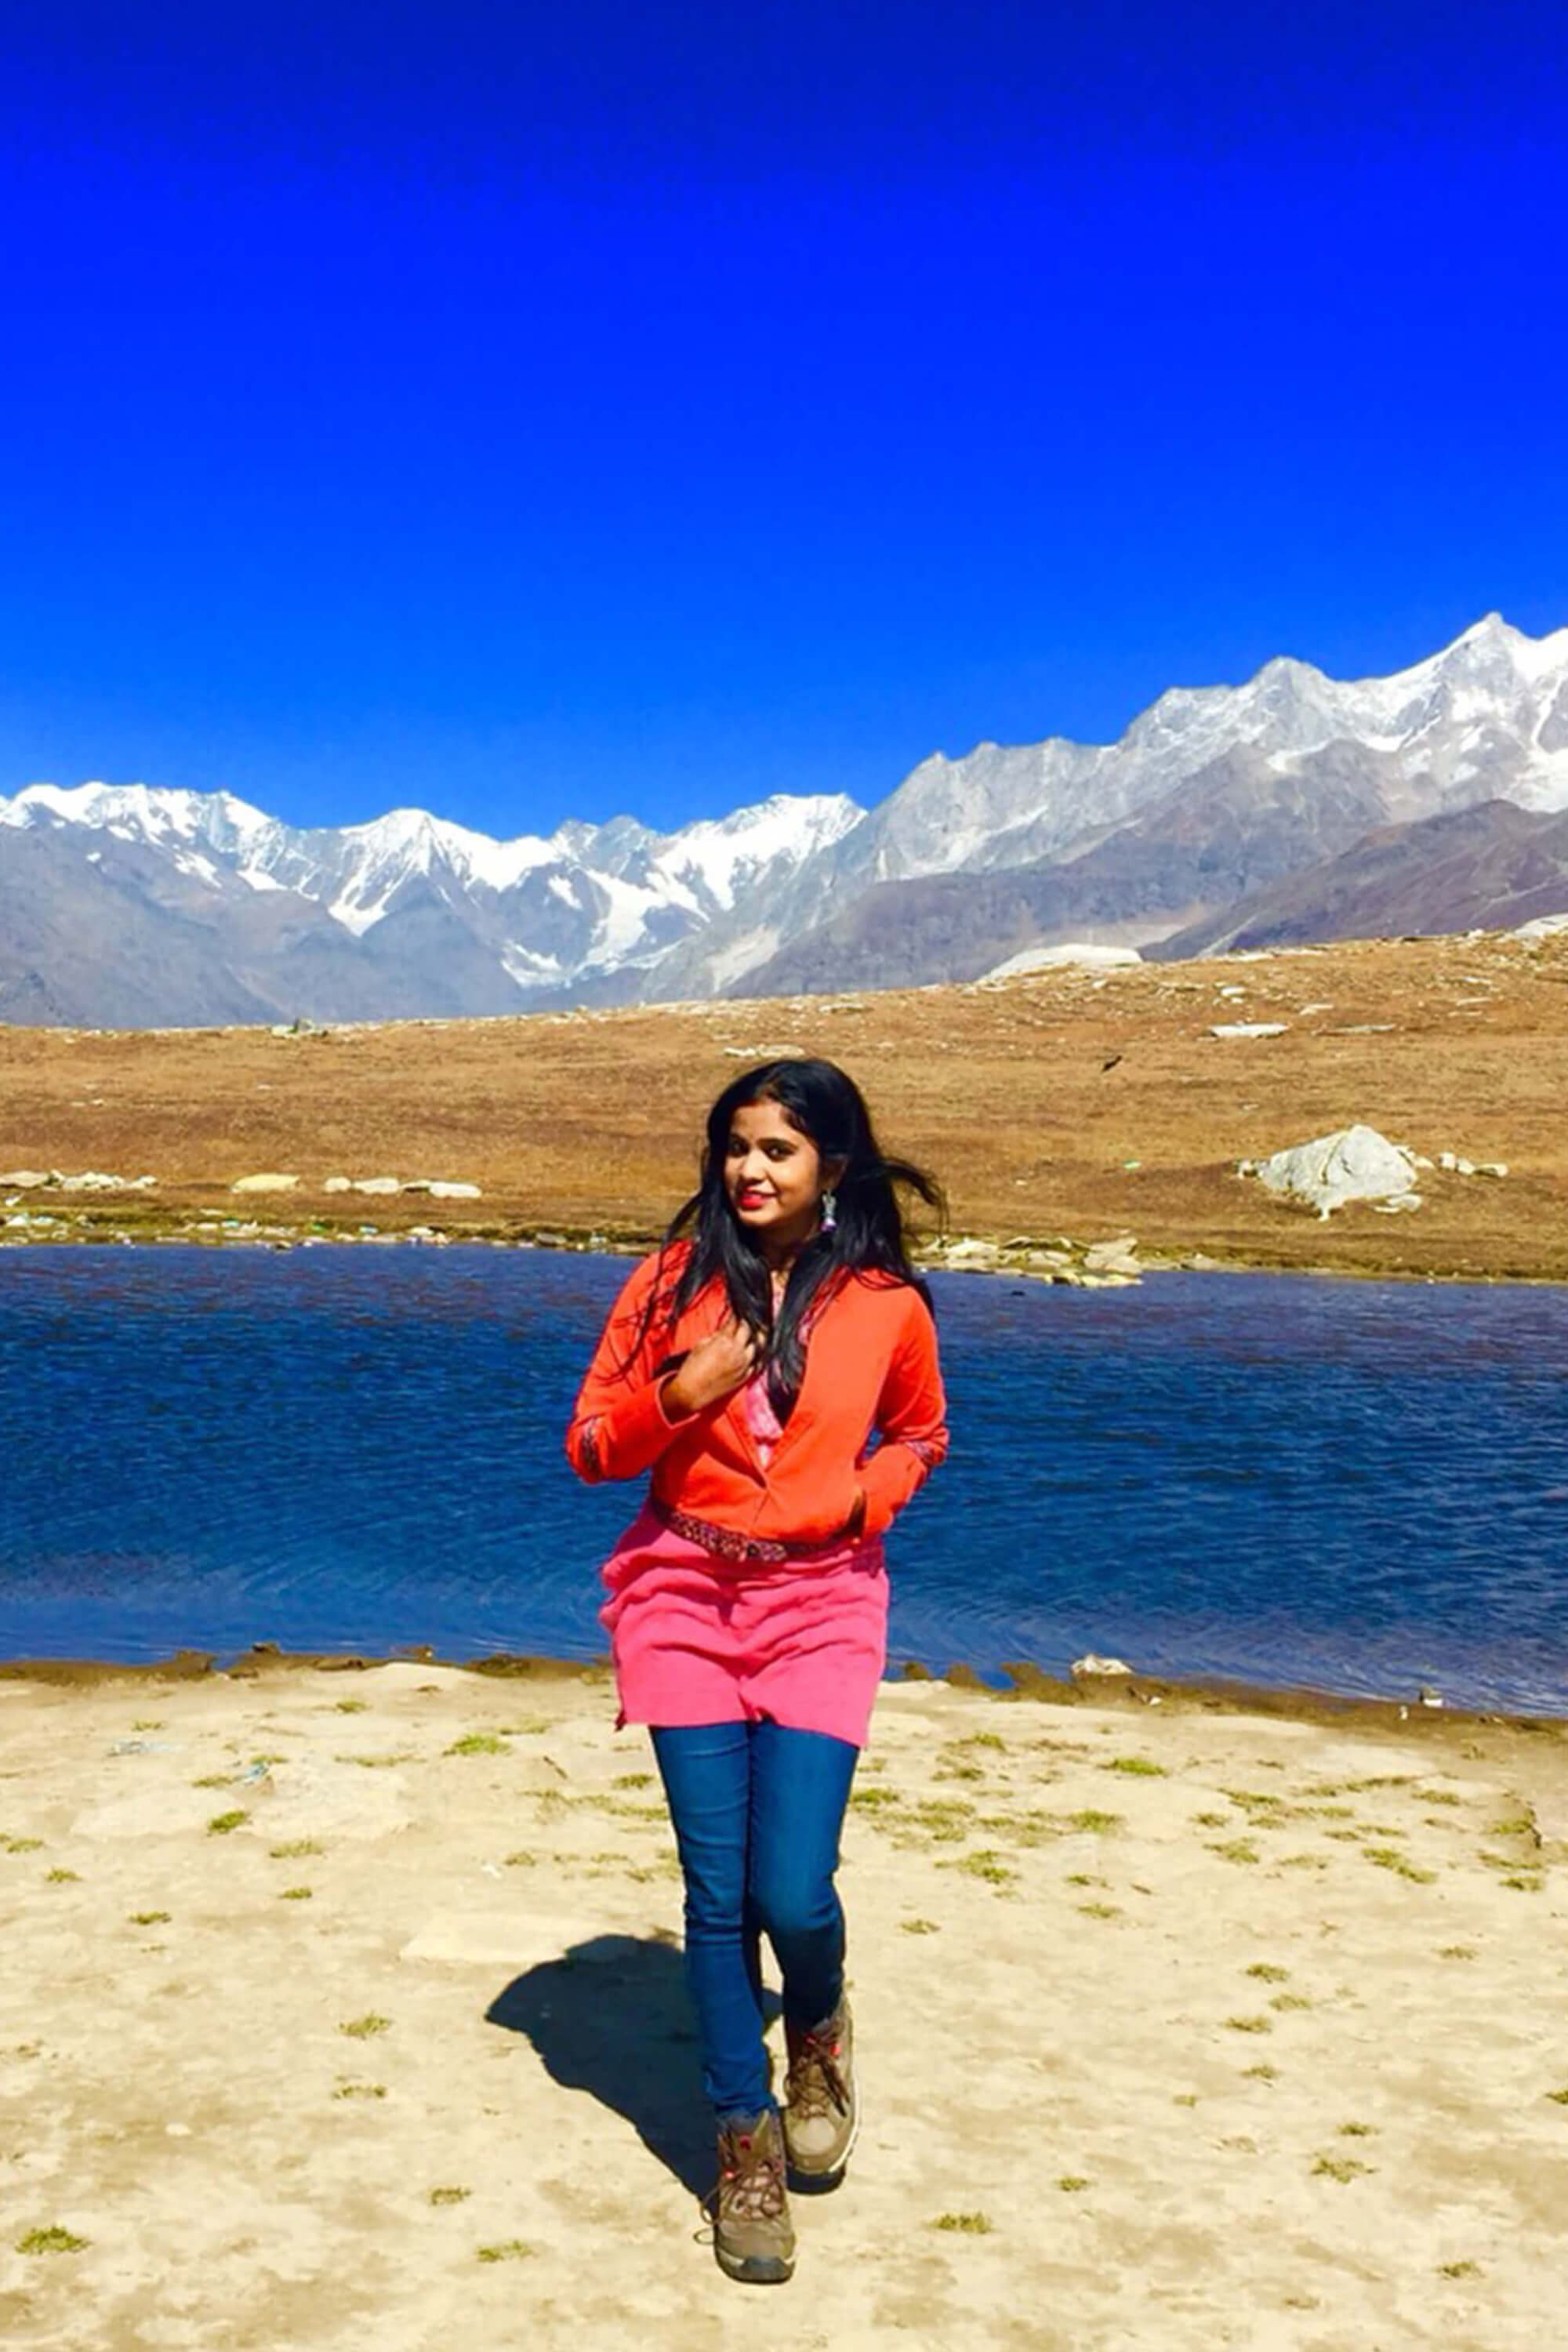 lost somewhere in rohtang